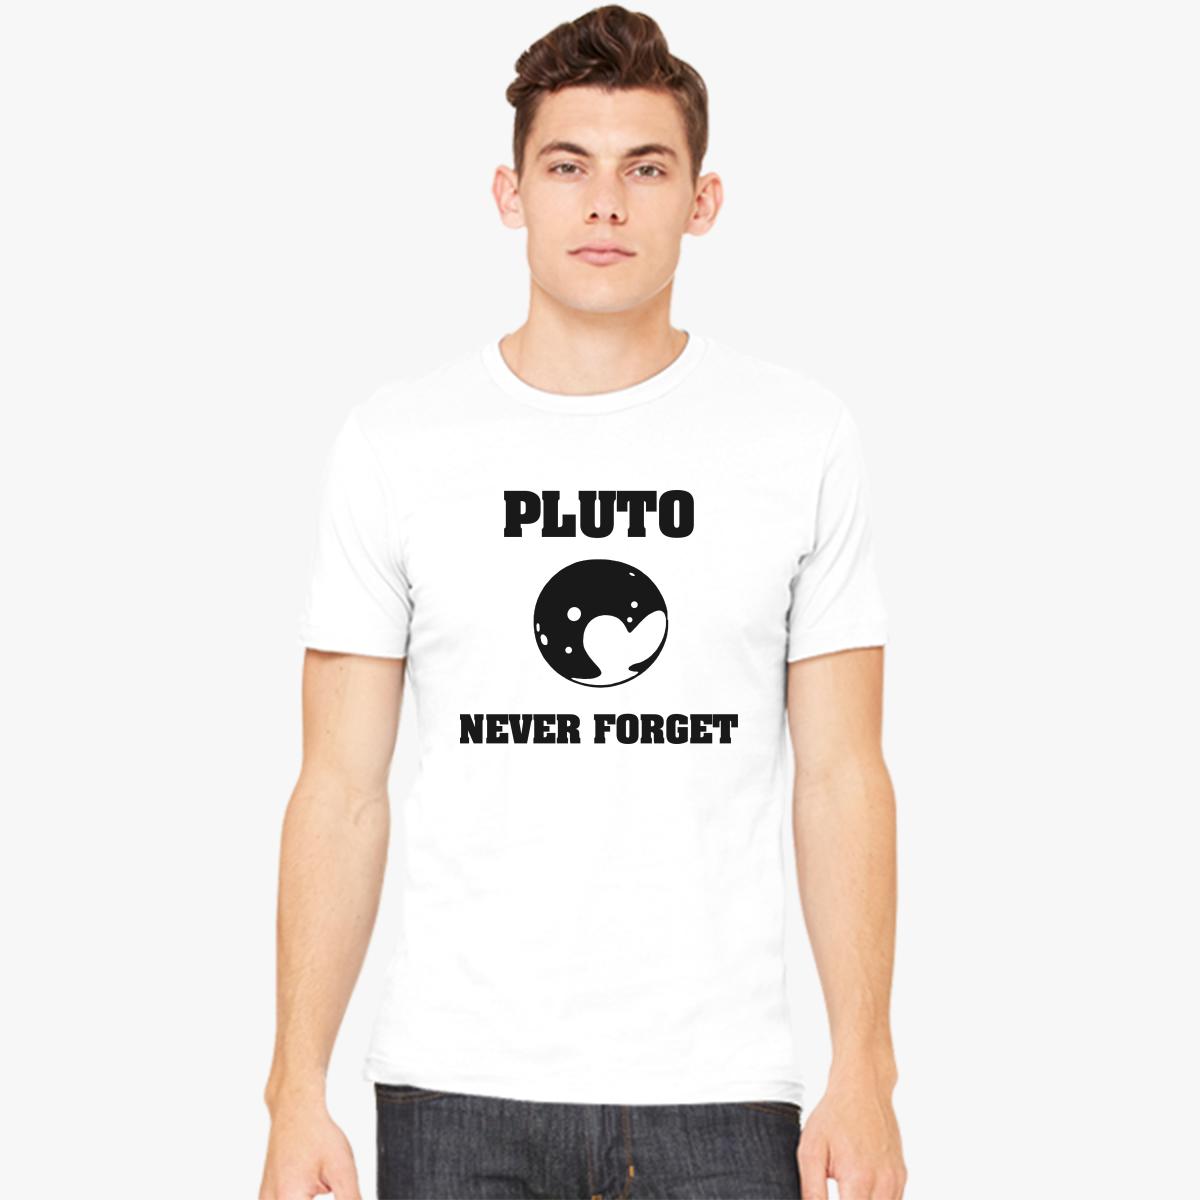 pluto-never-forget-planet-astronomy-space-men-s-t-shirt-white.jpg